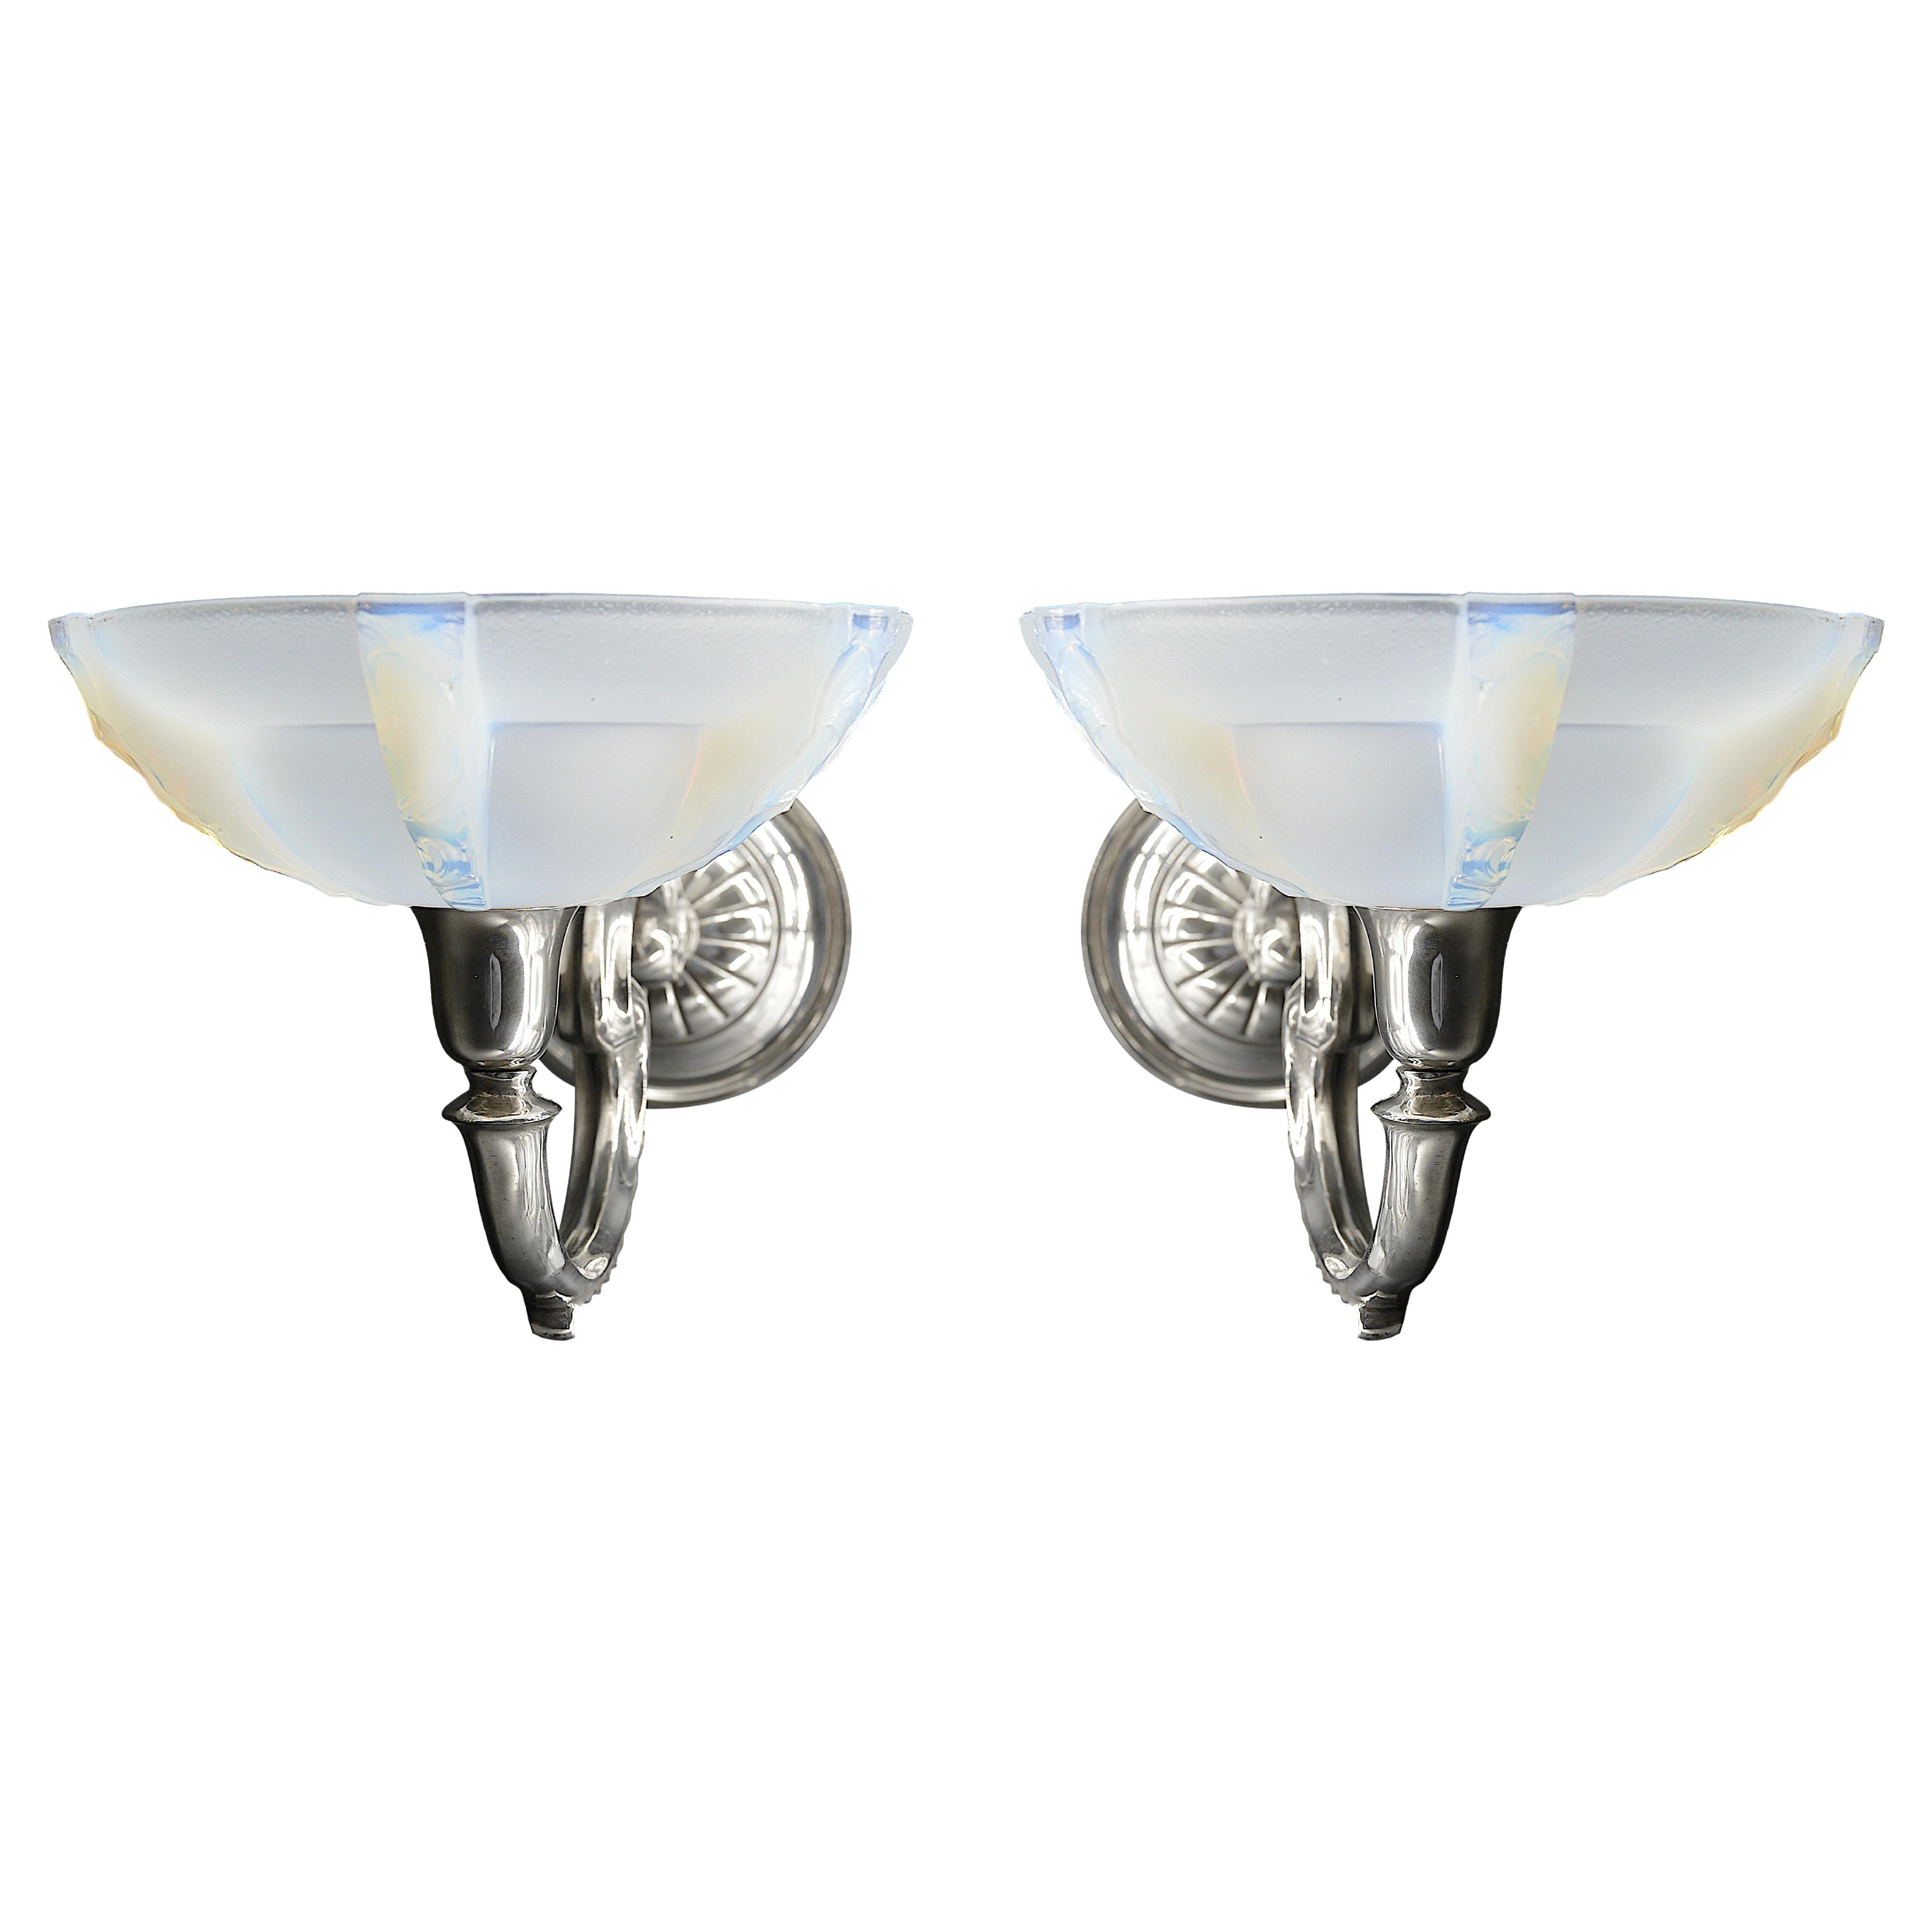 Petitot / Gauthier French Art Deco Wall Sconce Pair, 1930s